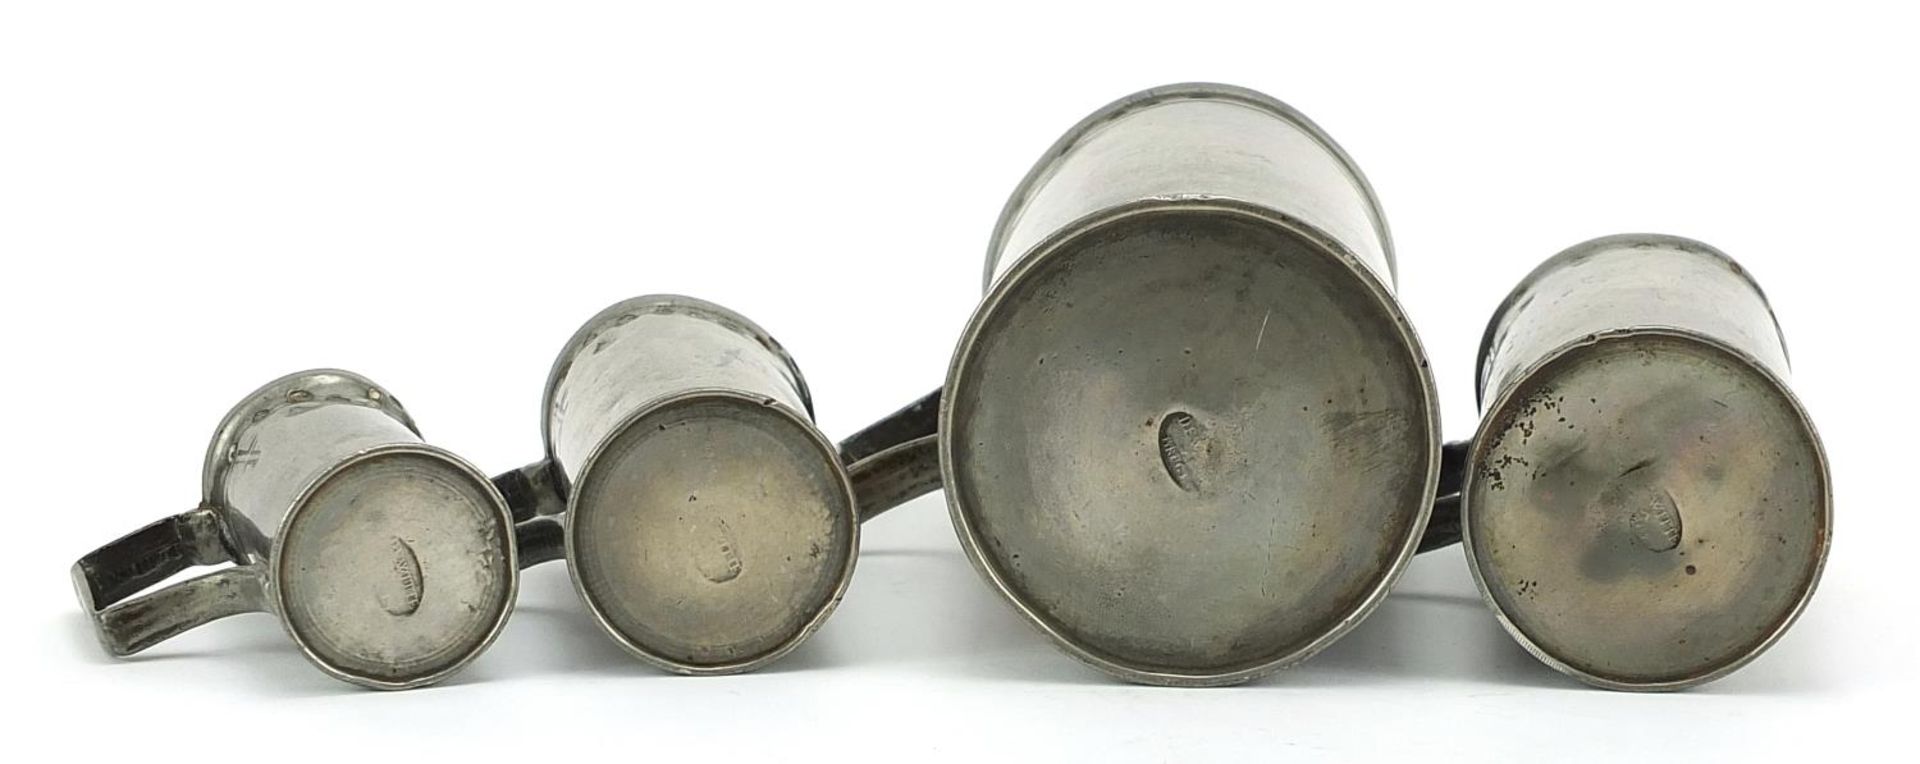 Graduated set of four antique pewter measures, indistinct maker's mark to each, possibly Dewitte - Image 5 of 6